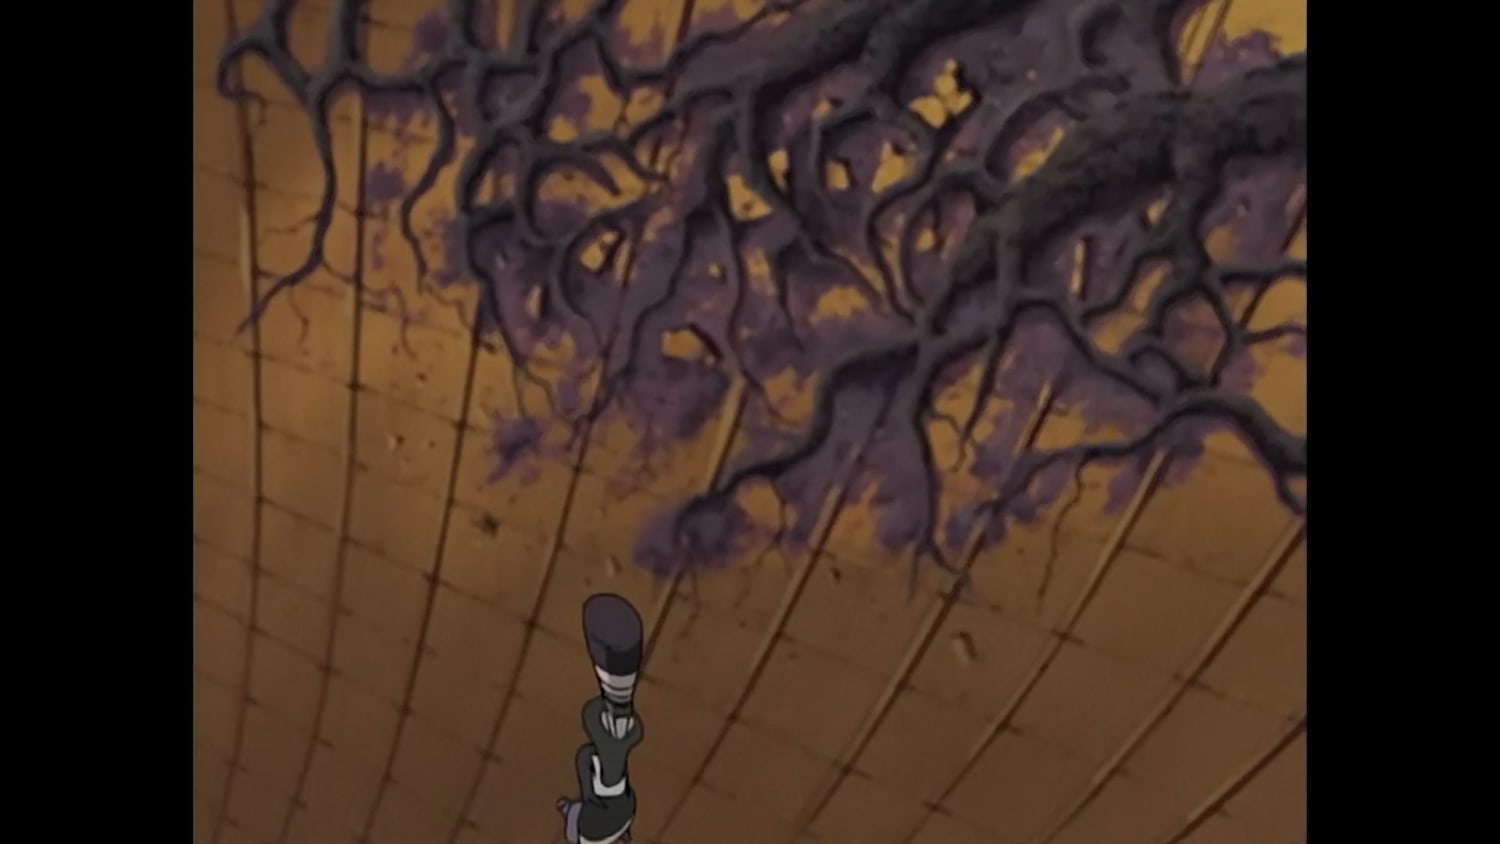 Sometimes its cool to see Orochimaru fight normally